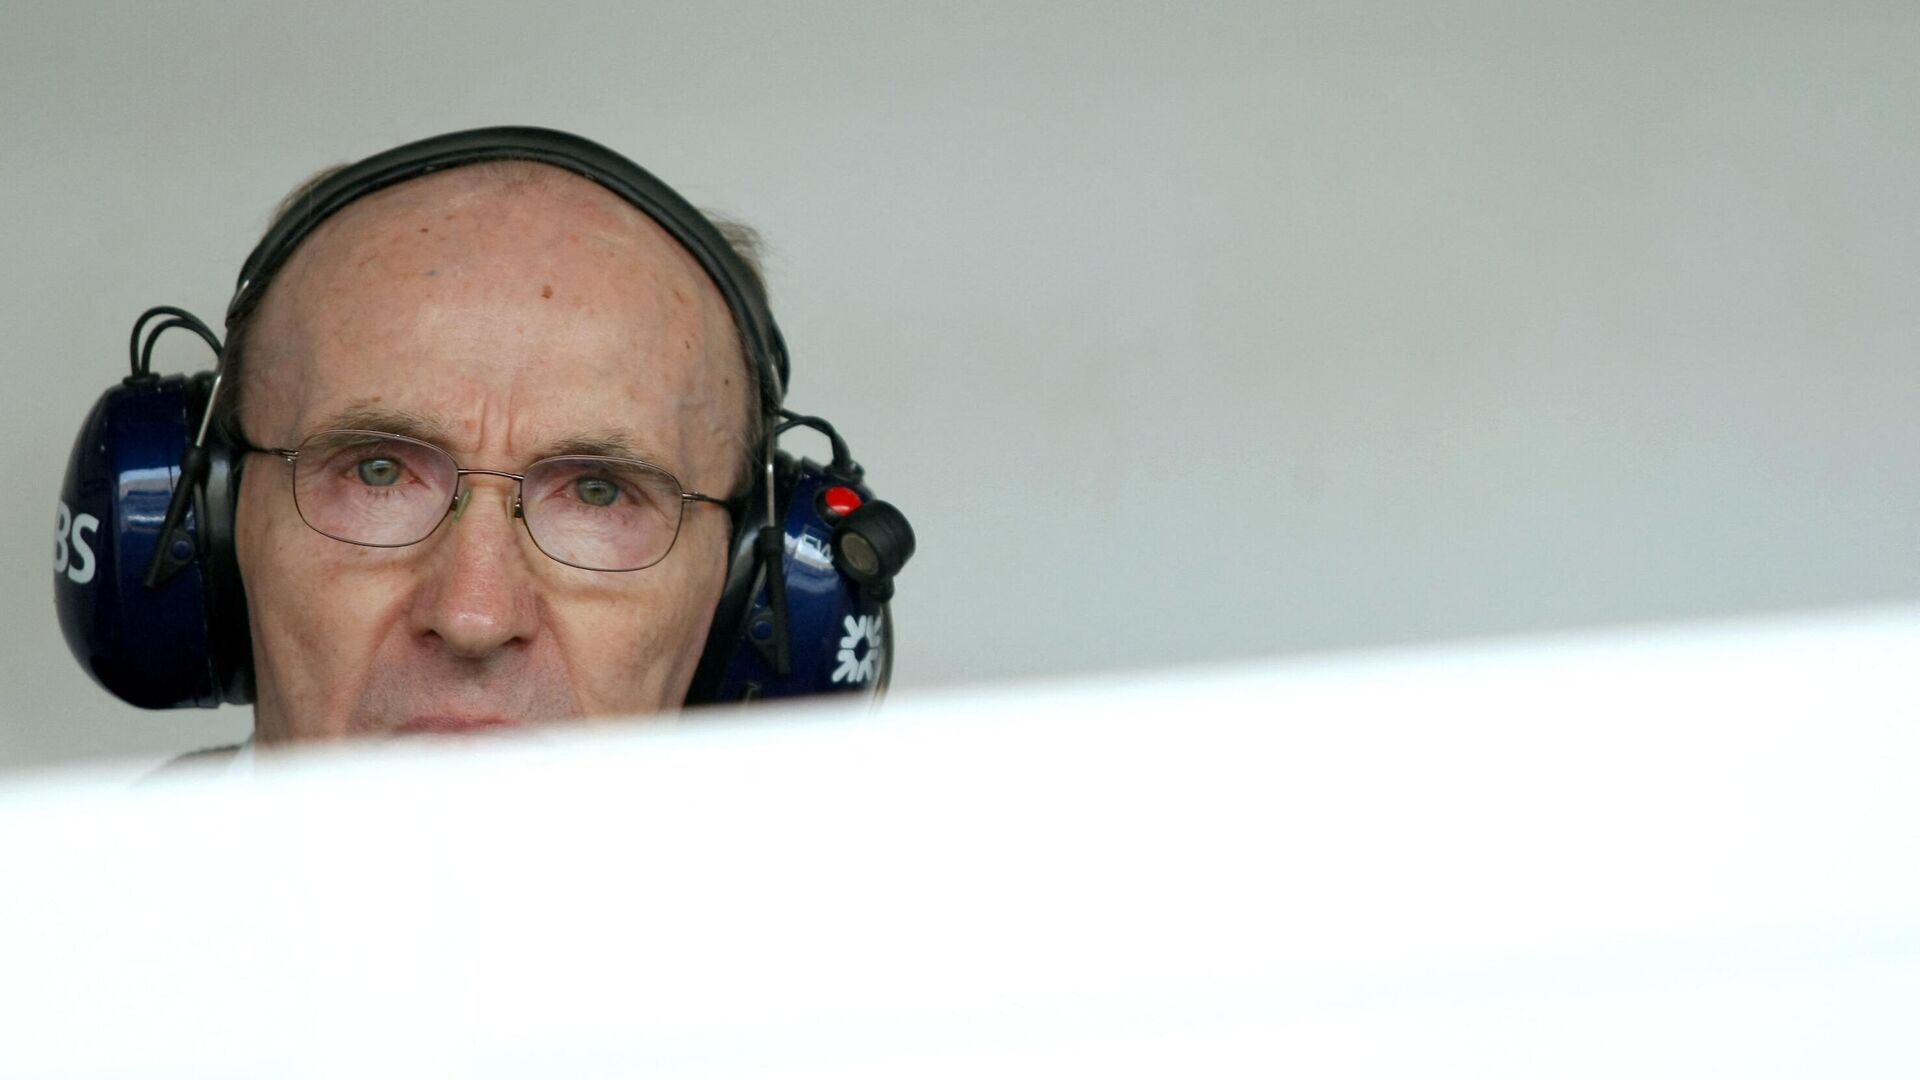 (FILES) In this file photo taken on April 5, 2008 William's manager Frank Williams is pictured in the pits of the Sakhir racetrack, in Manama, during the third practice session of the Bahrain Formula One Grand Prix. - Frank Williams, founder and former team principal of Williams Racing, has died at the age of 79, the team announced on Sunday, November 28. (Photo by Guillaume BAPTISTE / AFP) - РИА Новости, 1920, 28.11.2021